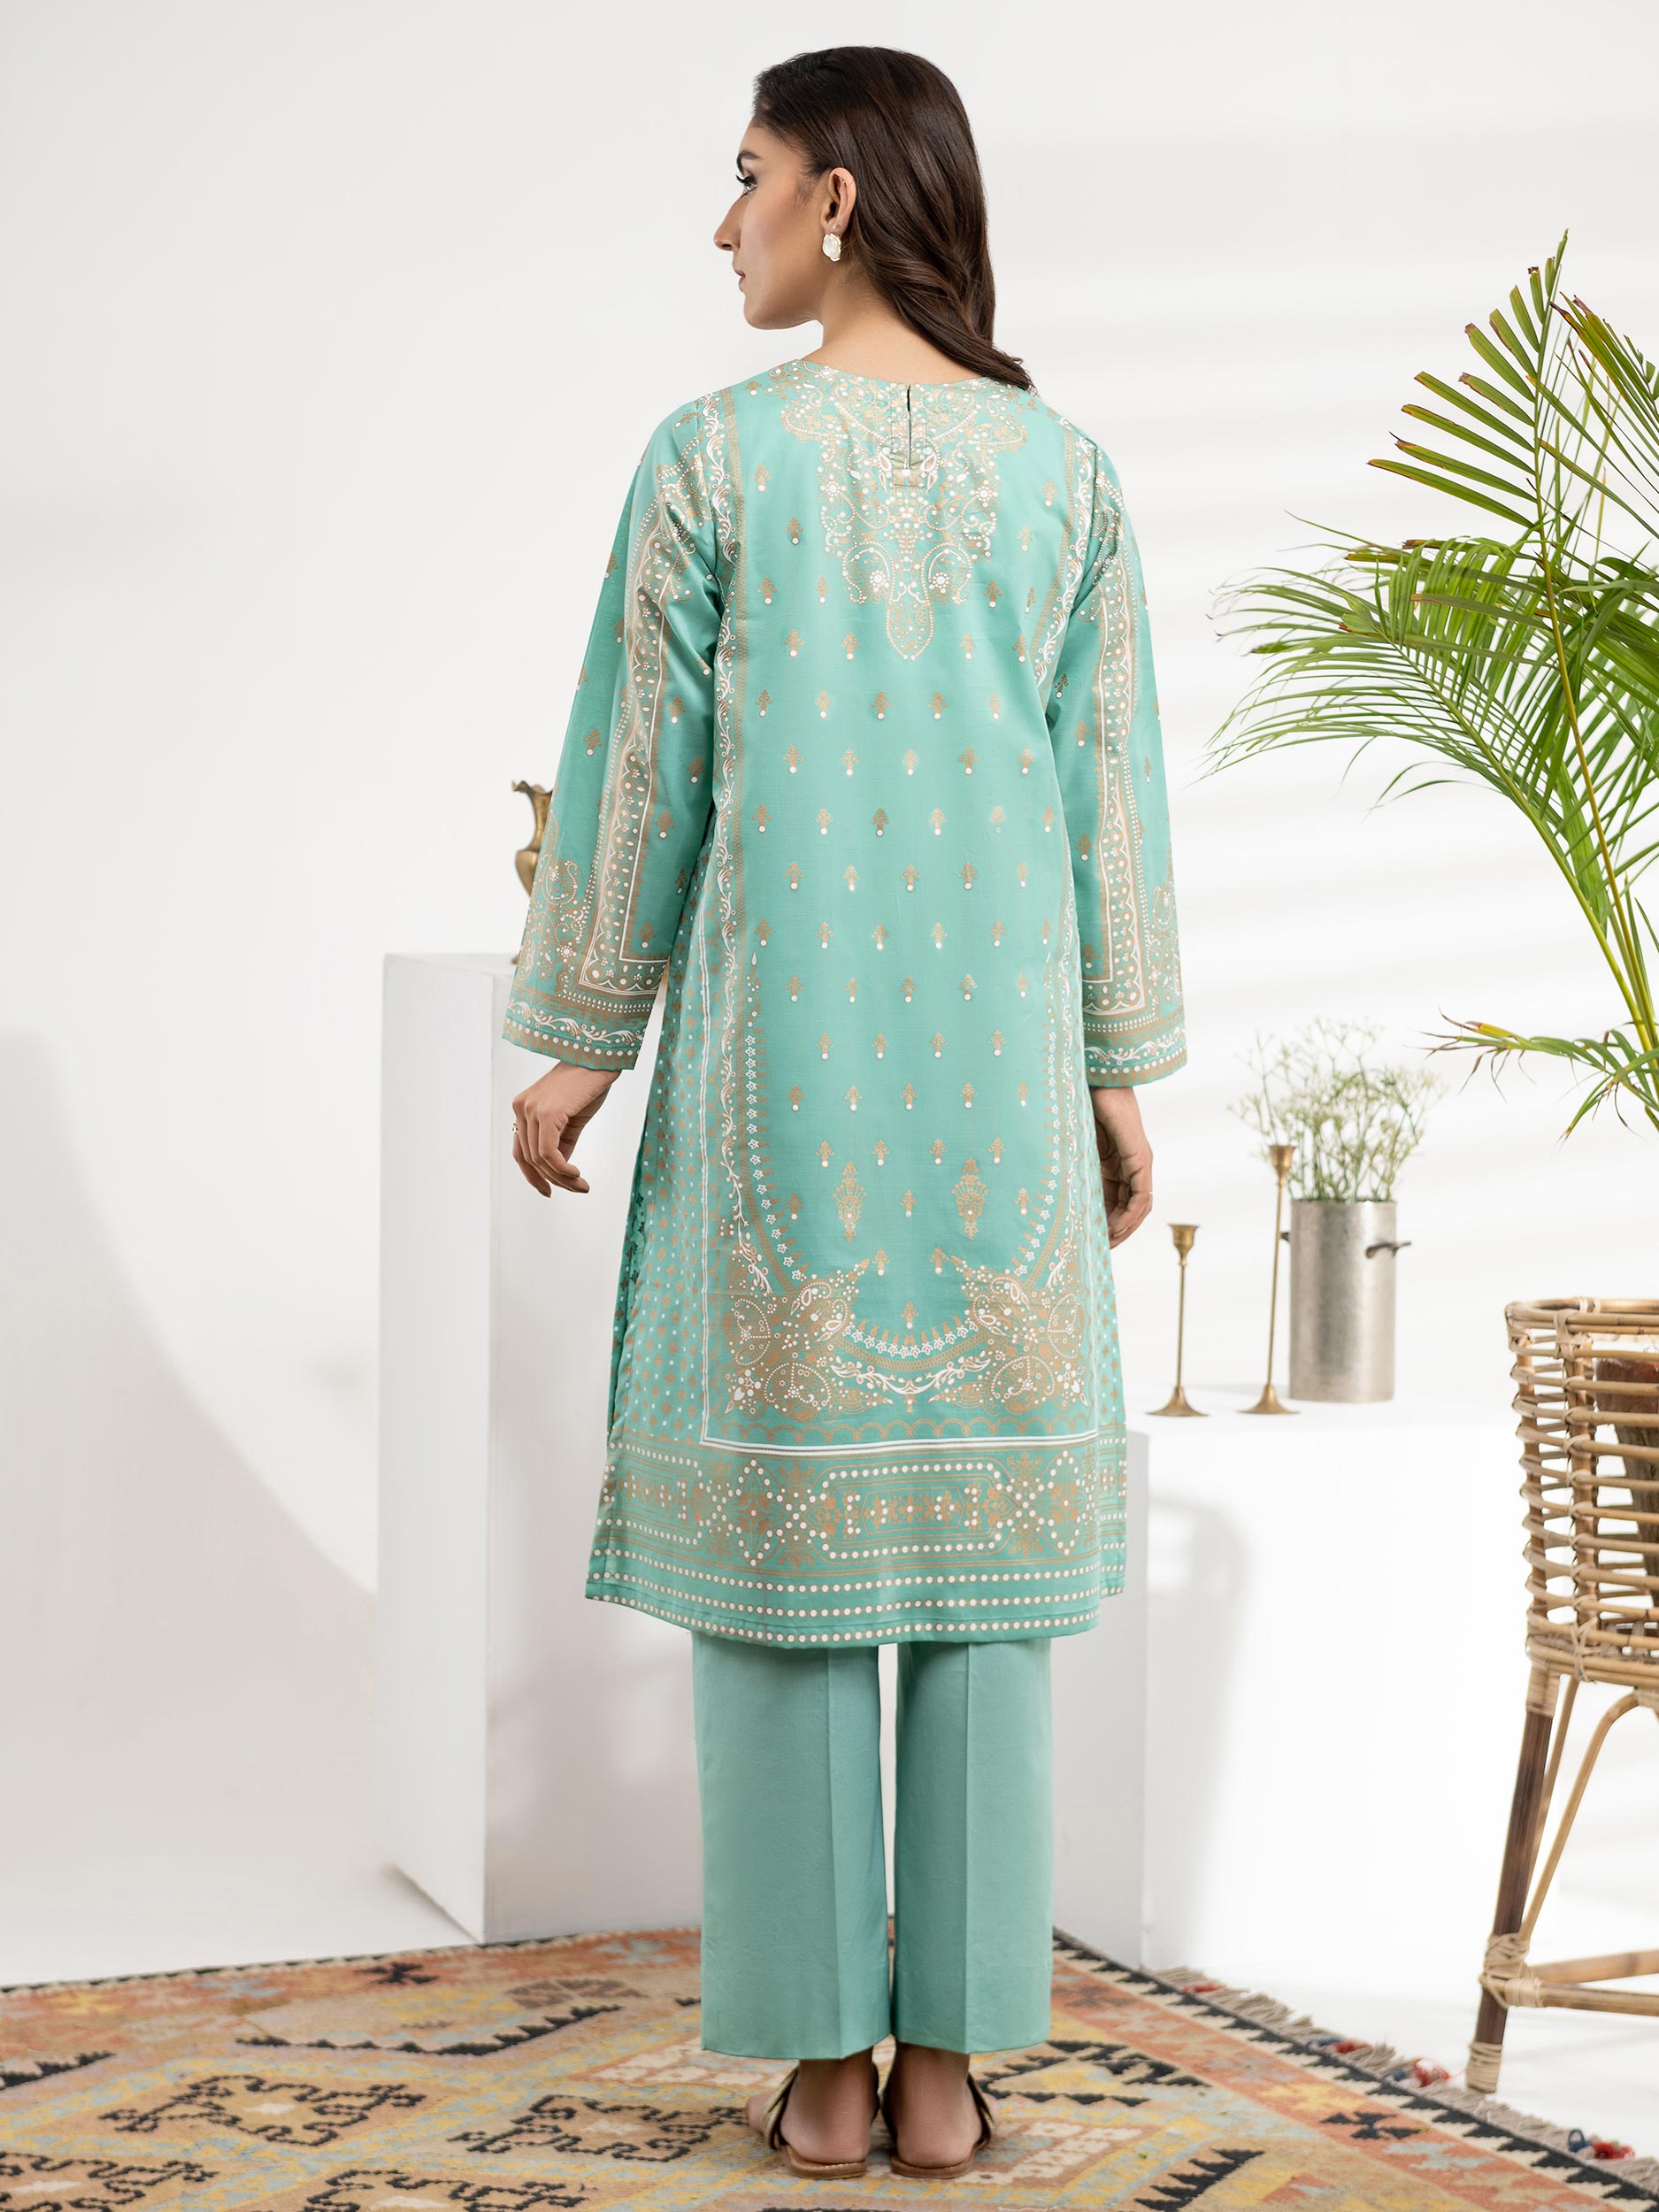 2 Piece Lawn Suit-Gold Pasted Printed (Unstitched)